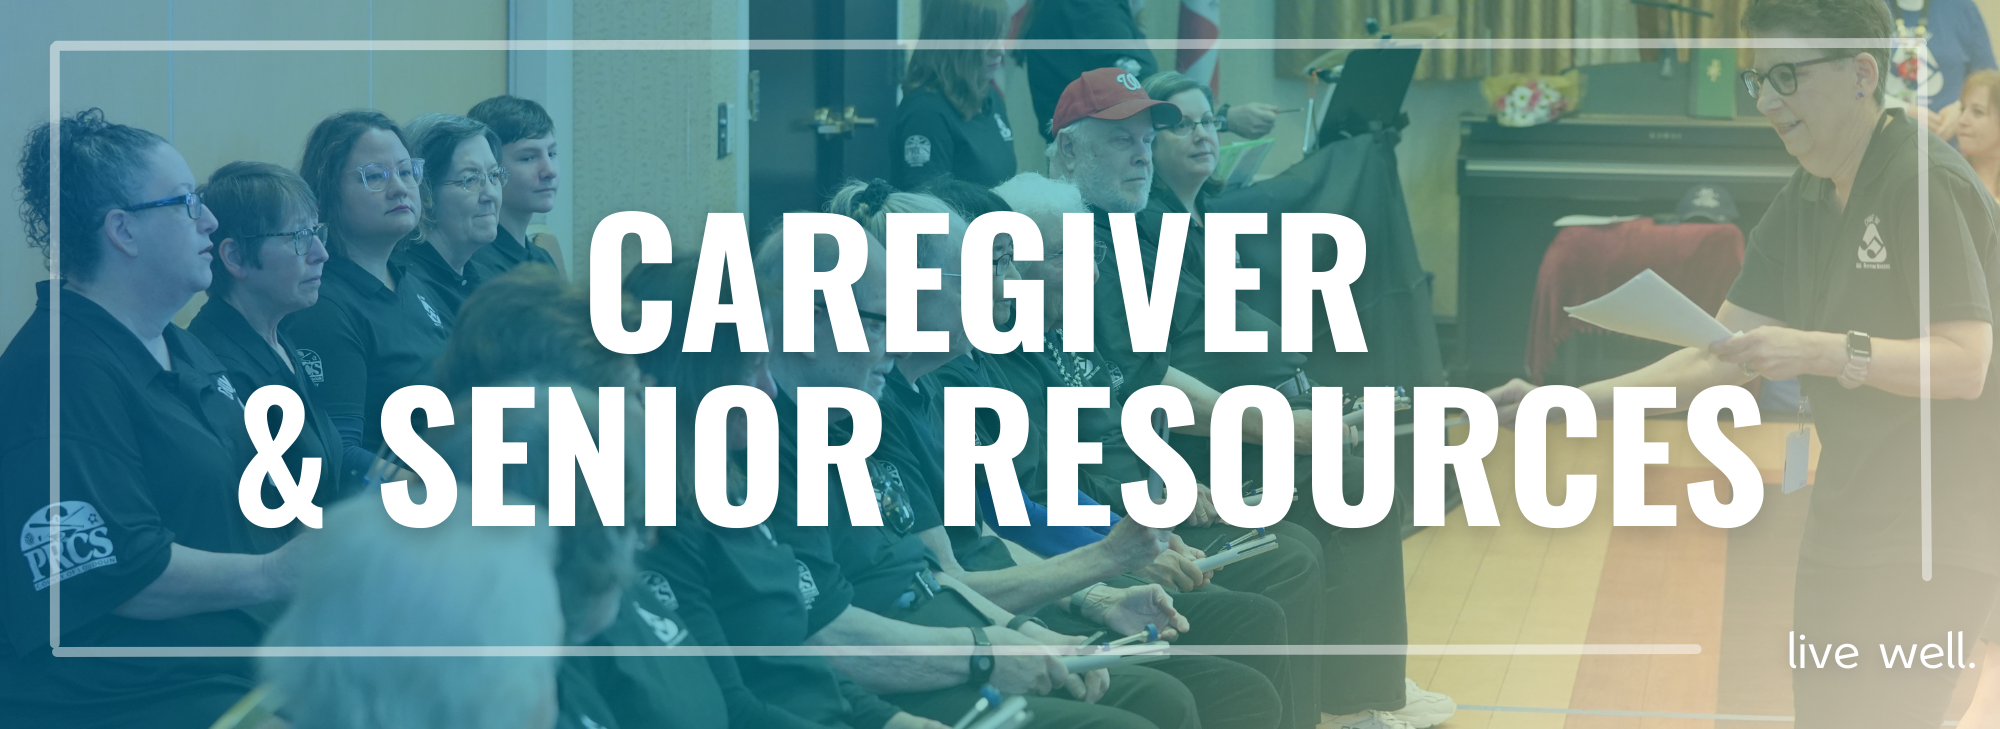 Image of older adults at a Loudoun County senior center with the words "Caregivers" and "Li